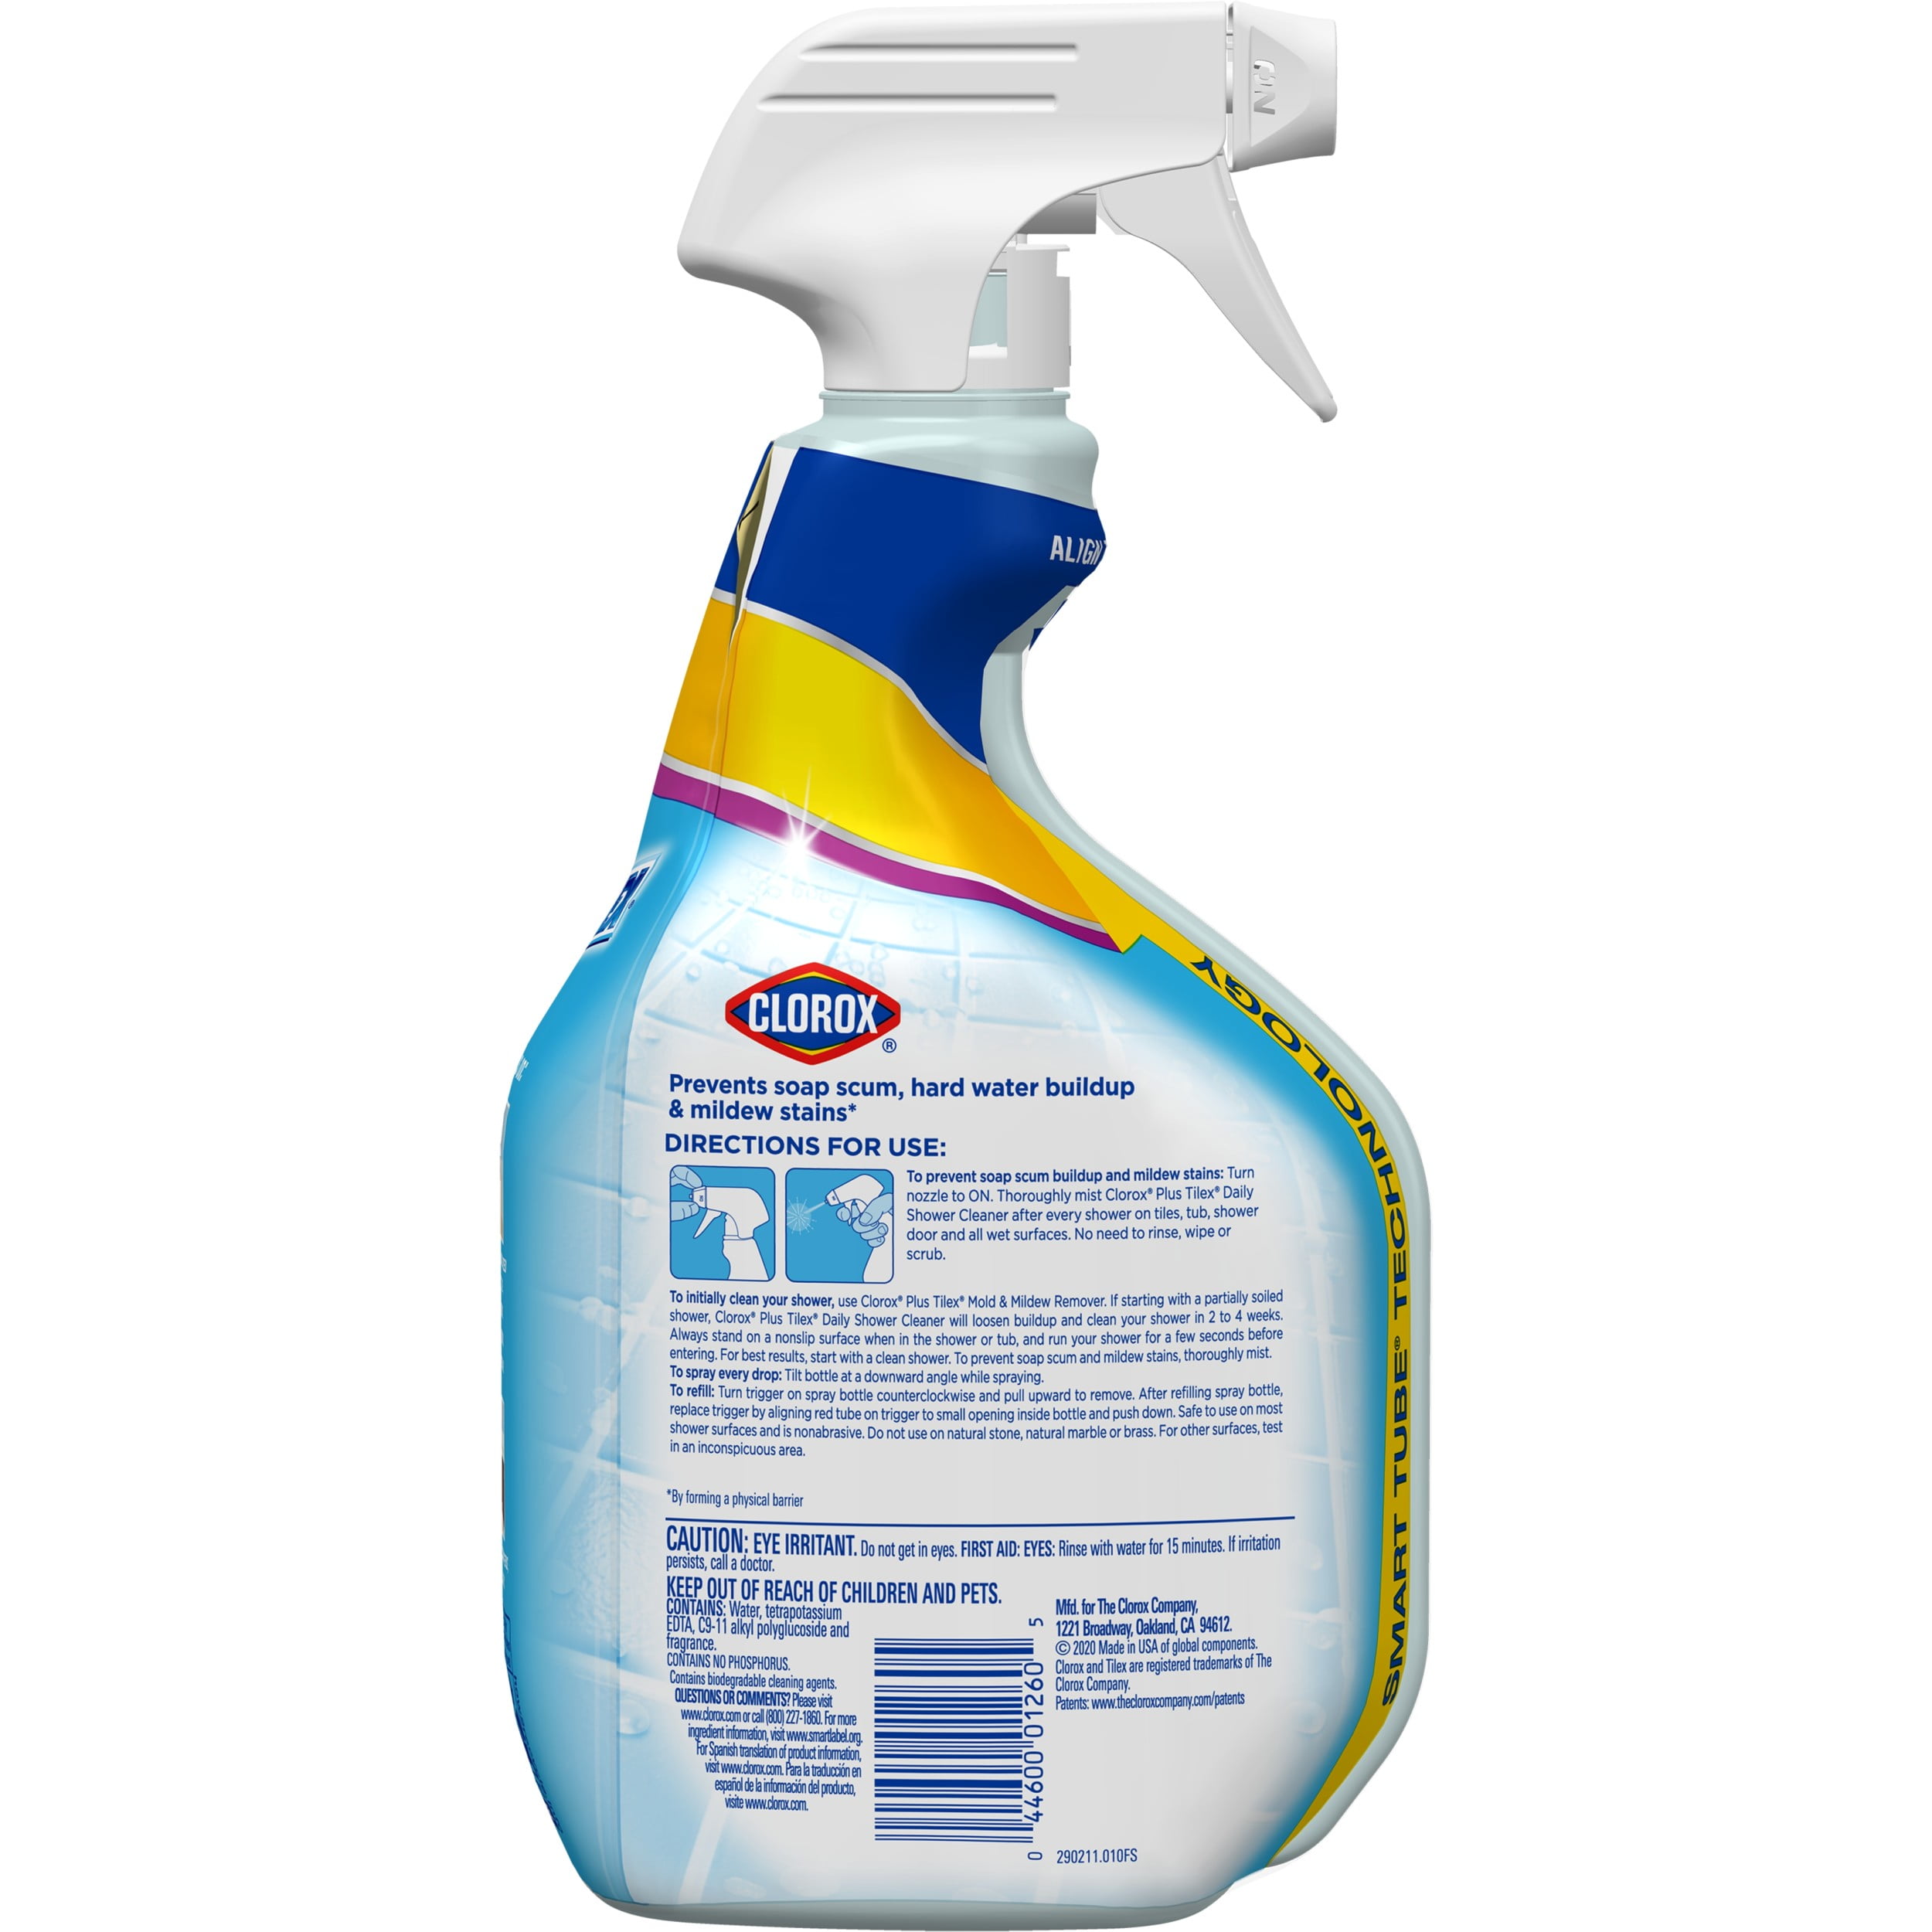 Chamkalo TOILET CLEANER (1LTR)- a powerful and effective toilet cleaner &  Bathroom & Tiles Cleaner